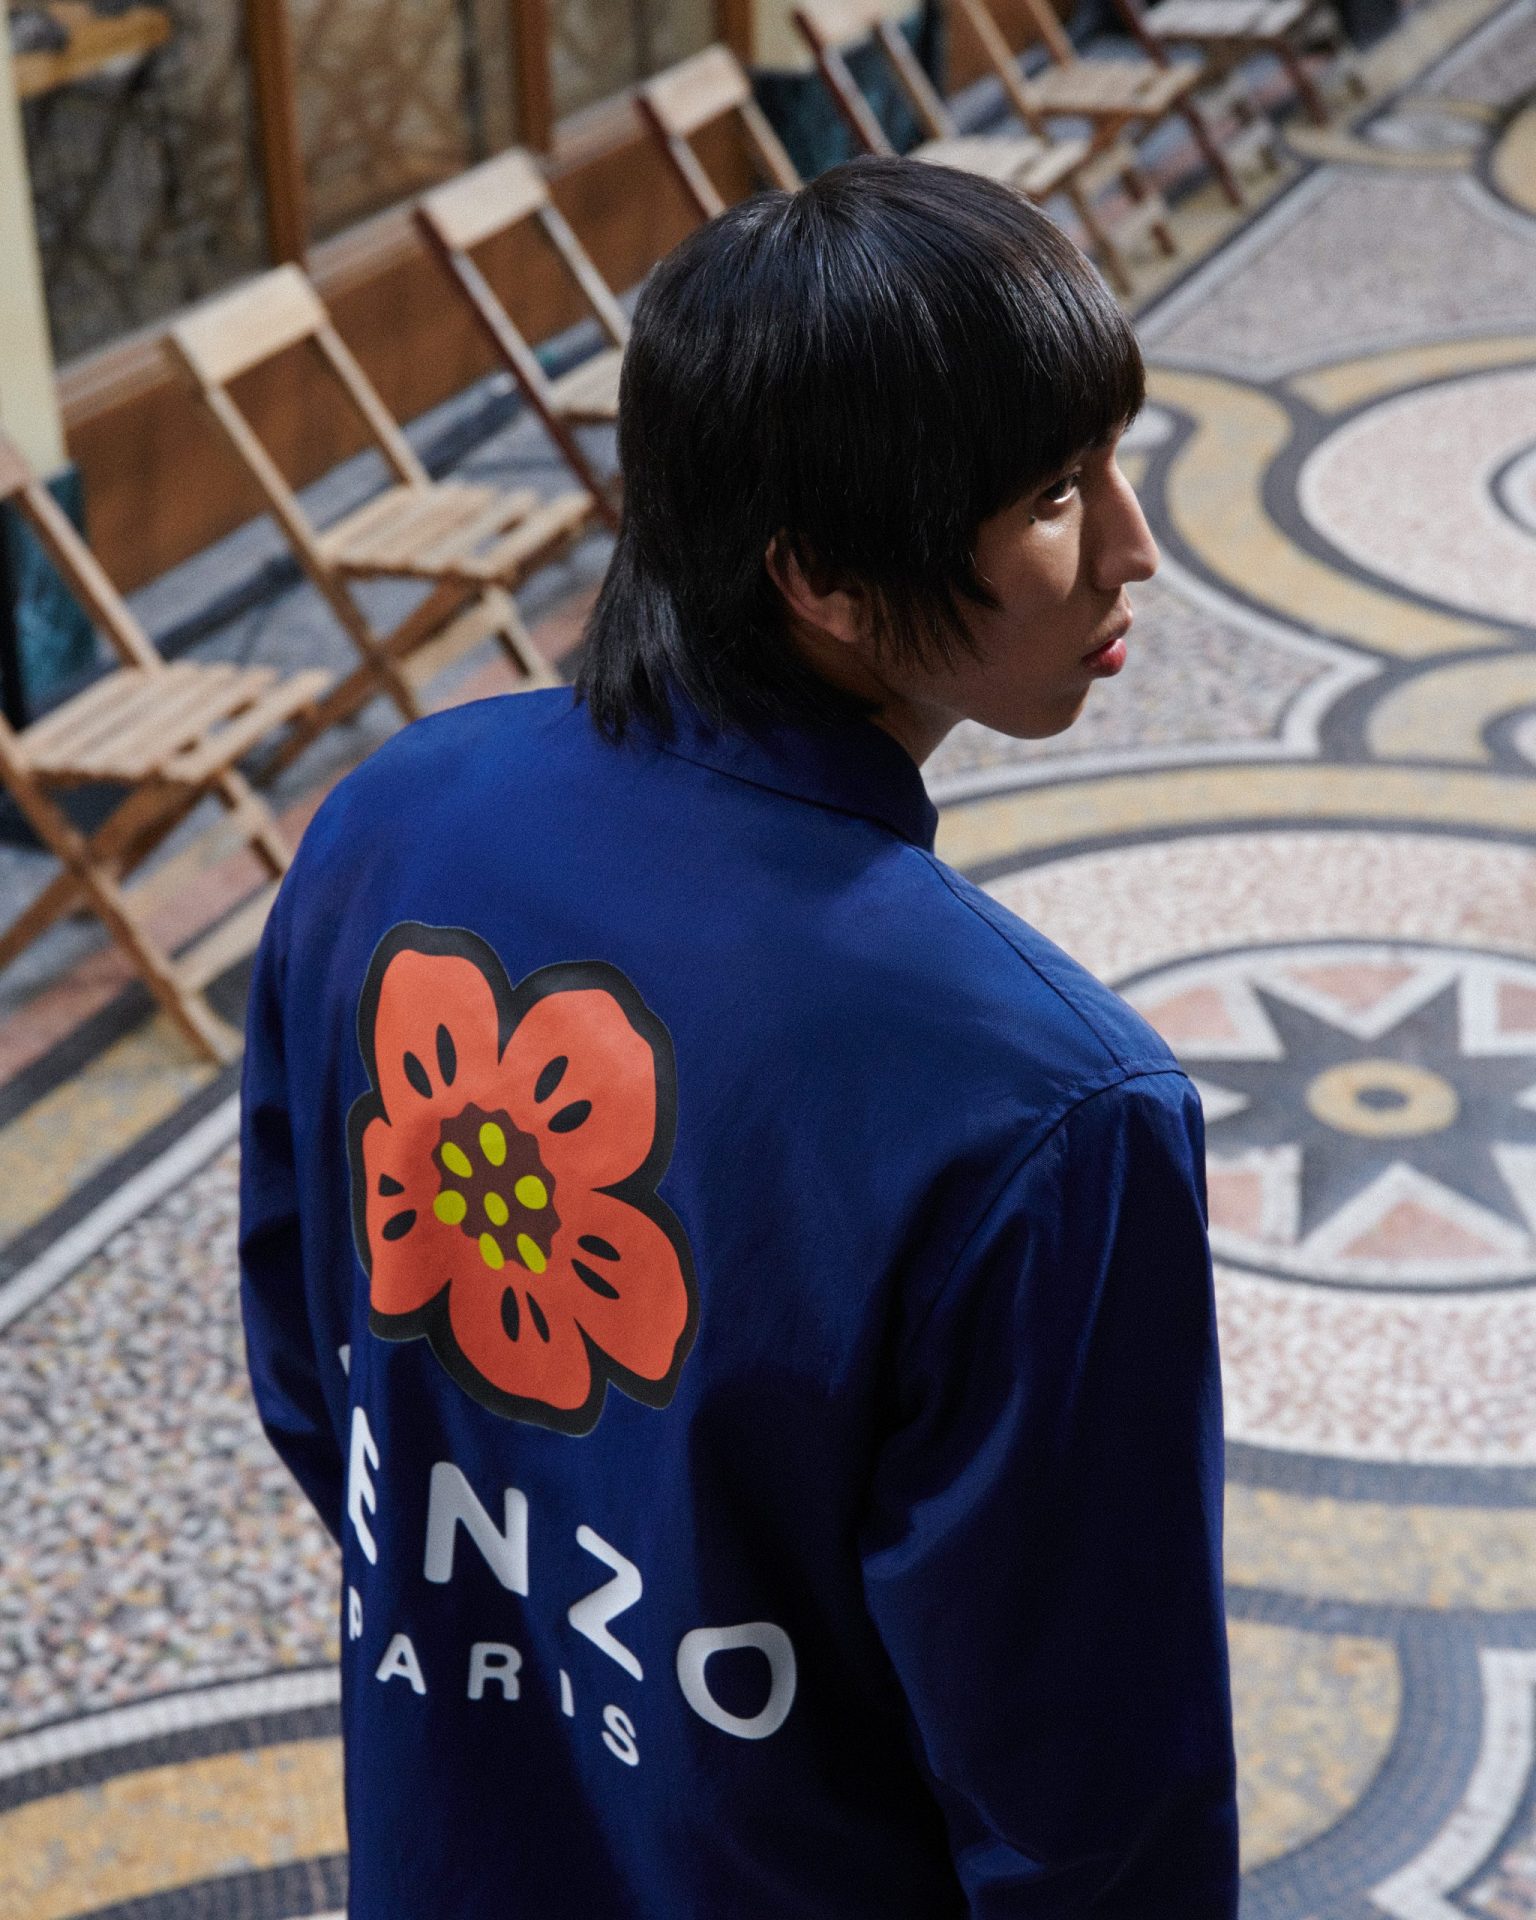 A First Look At Nigo's Kenzo, Where The Clothing Is The Star Of